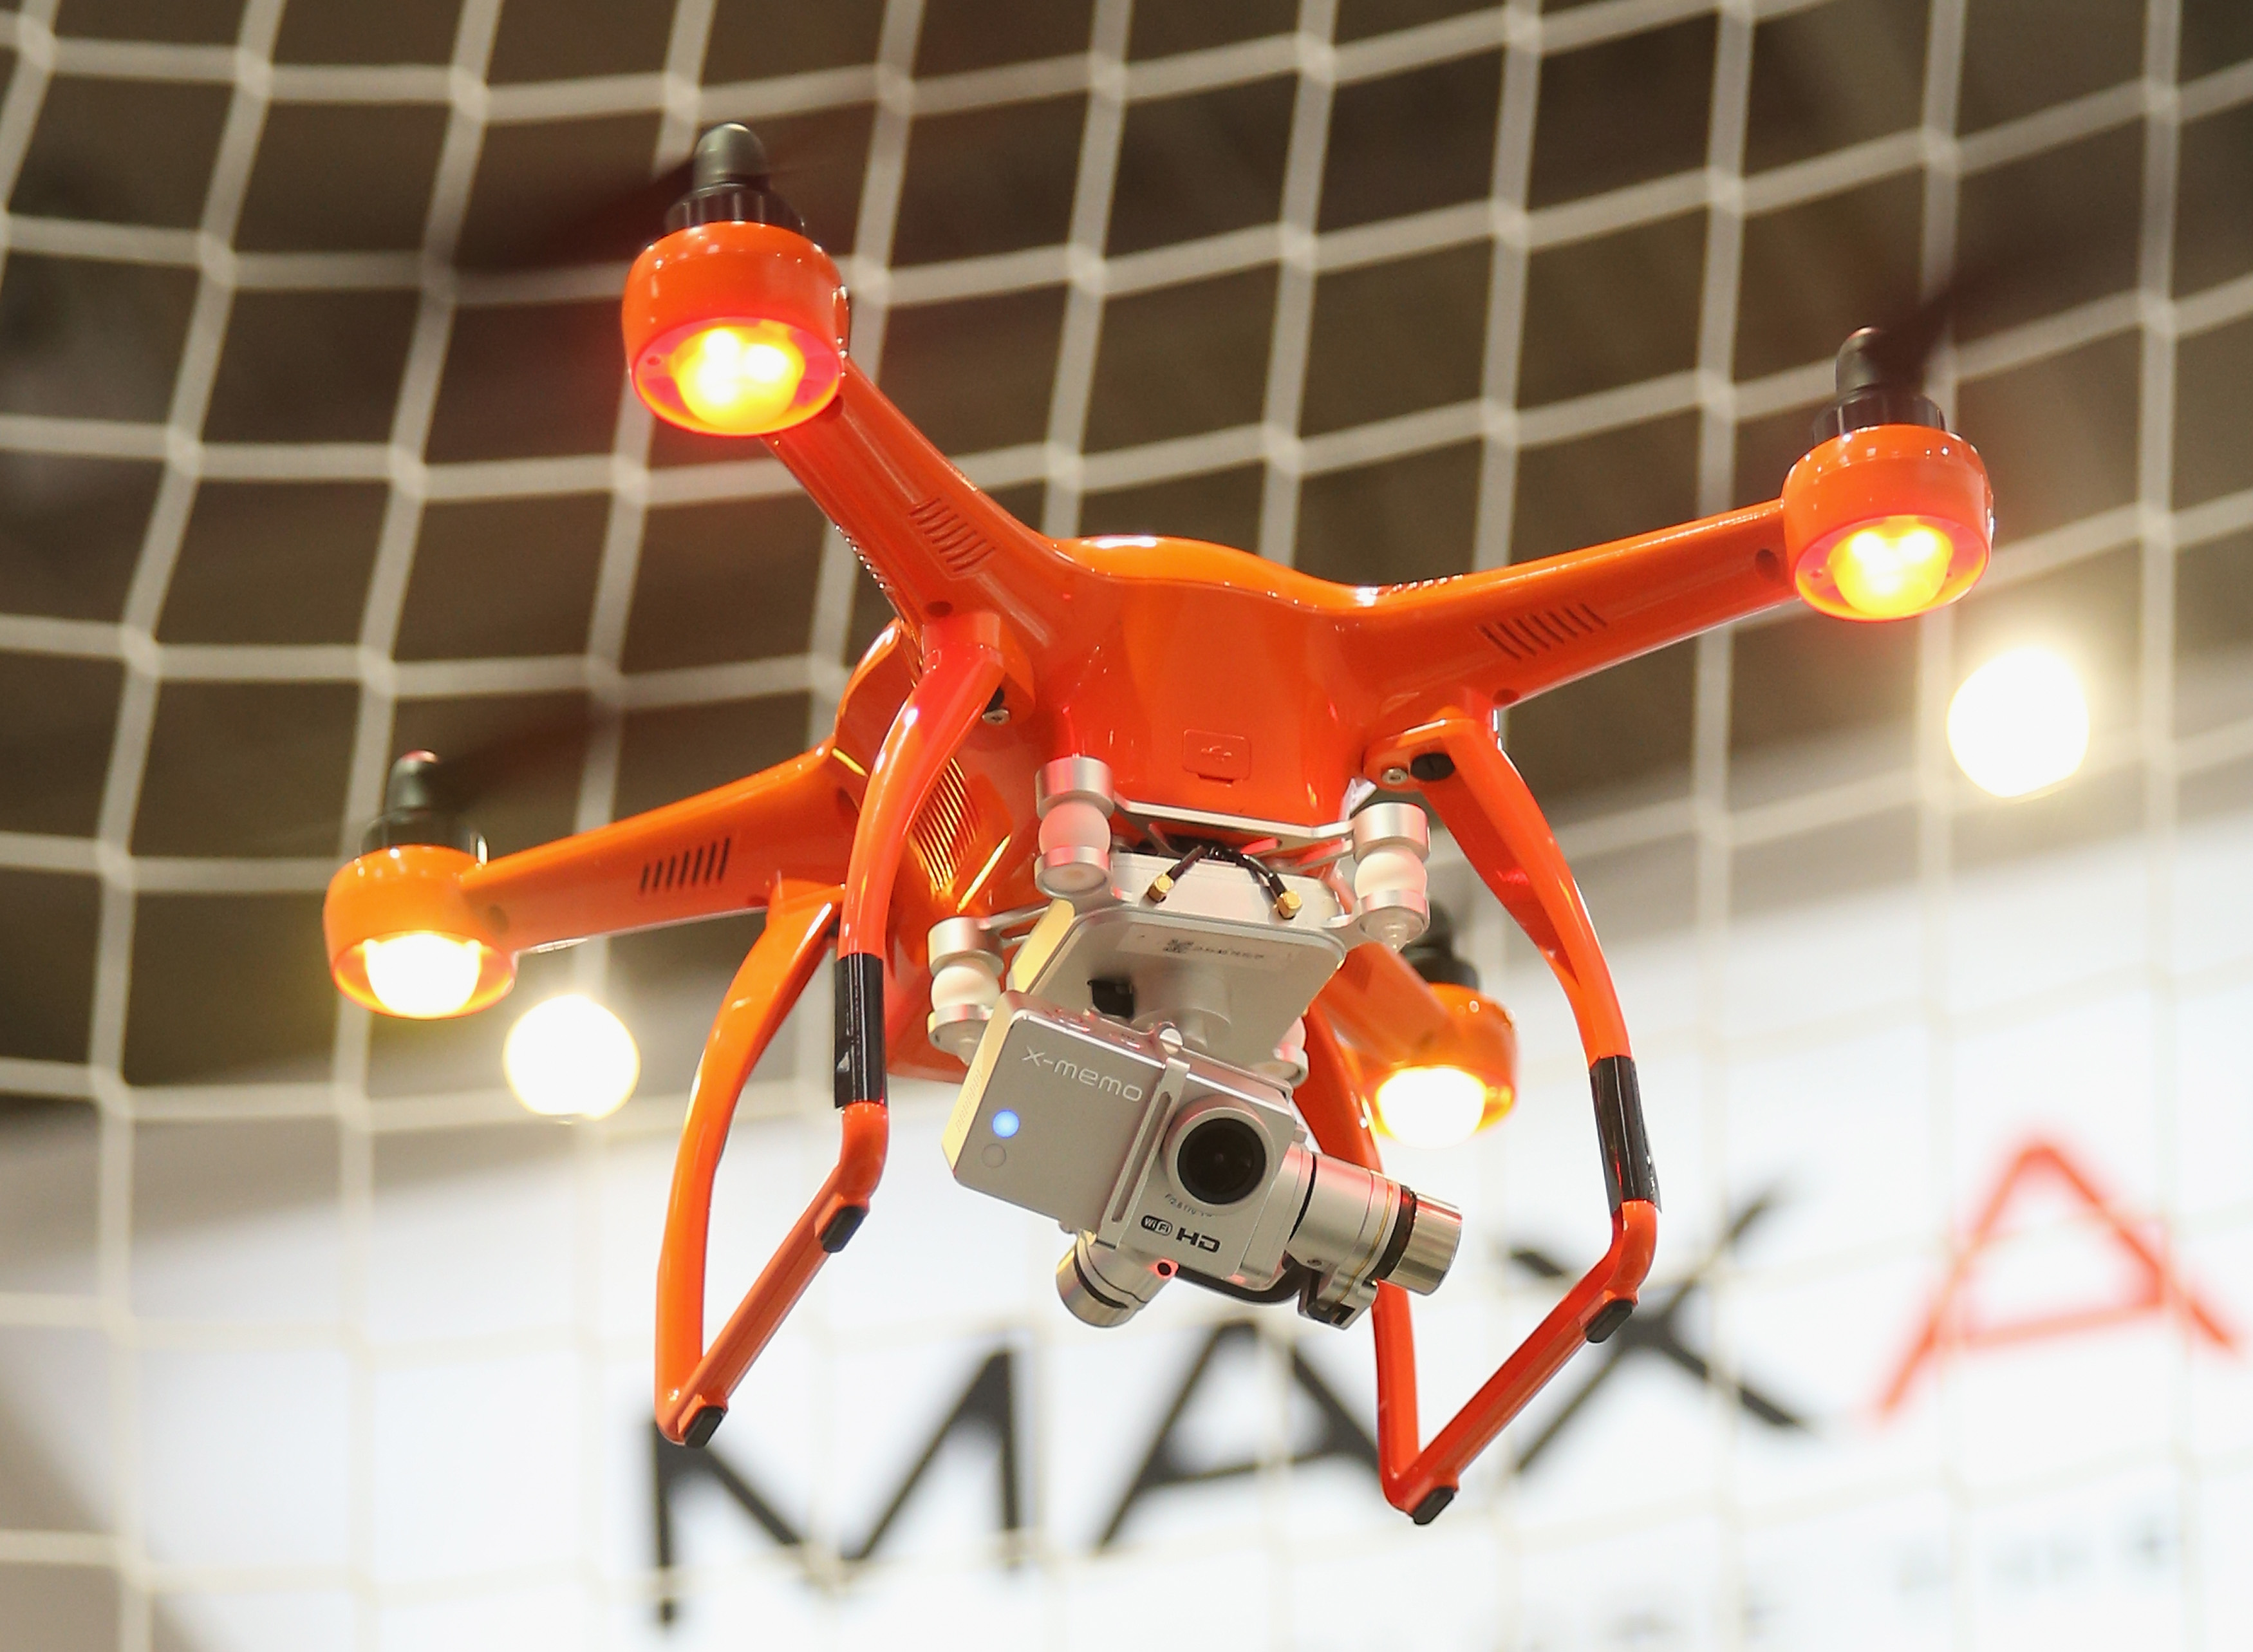 Drones are revolutionizing the media industry